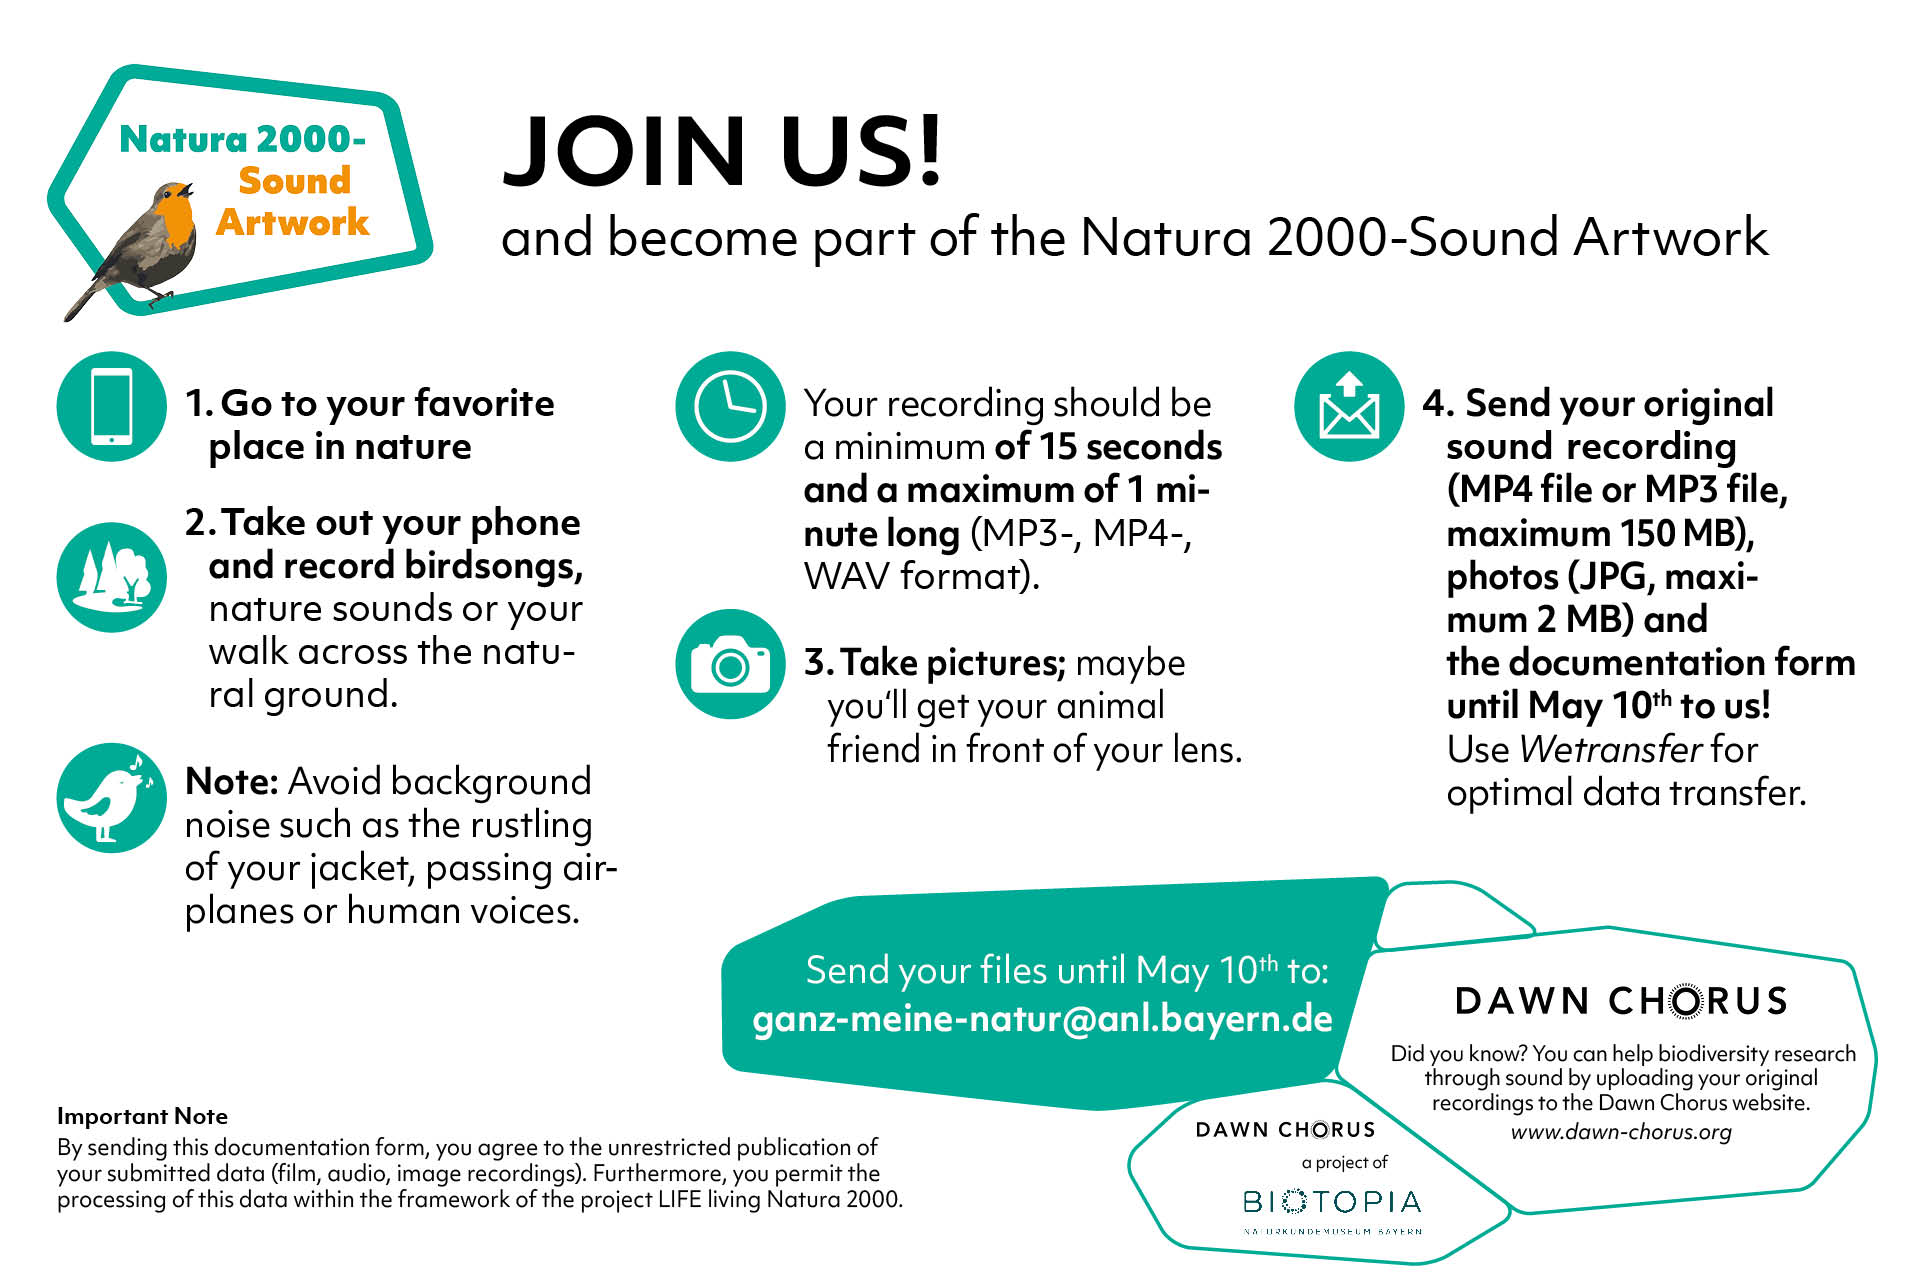 Instructions for participating in the Natura 2000 sound artwork.